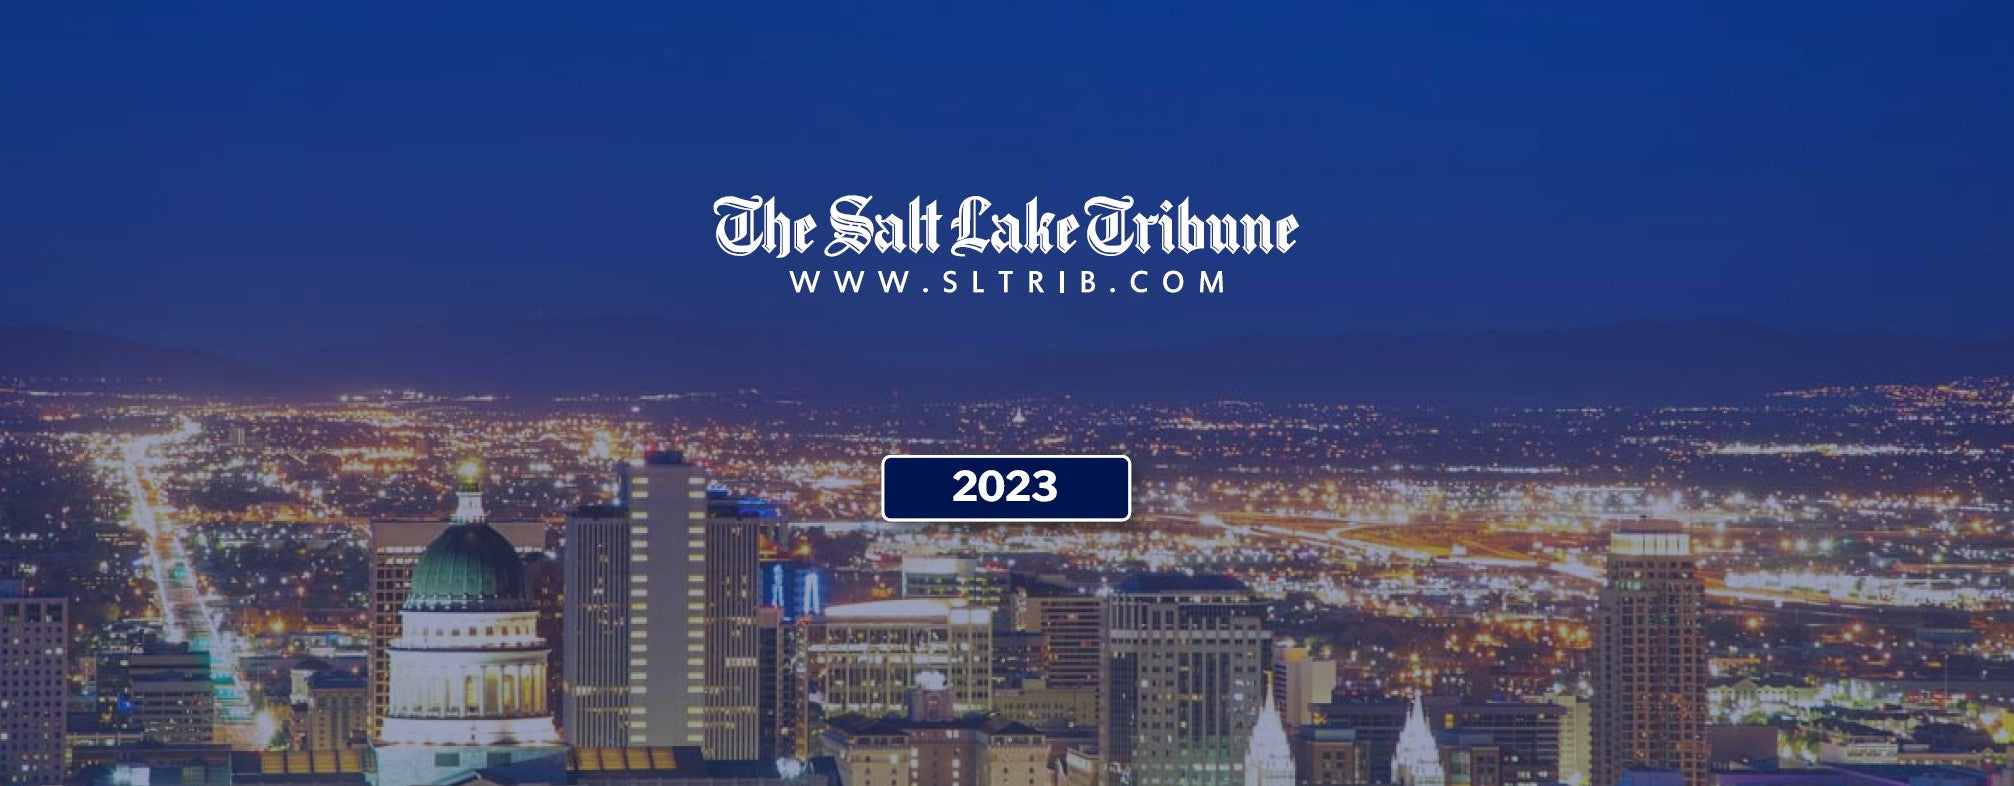 SALT LAKE TRIBUNE NAMES KT TAPE A WINNER OF THE WASATCH FRONT TOP WORKPLACES 2023 AWARD